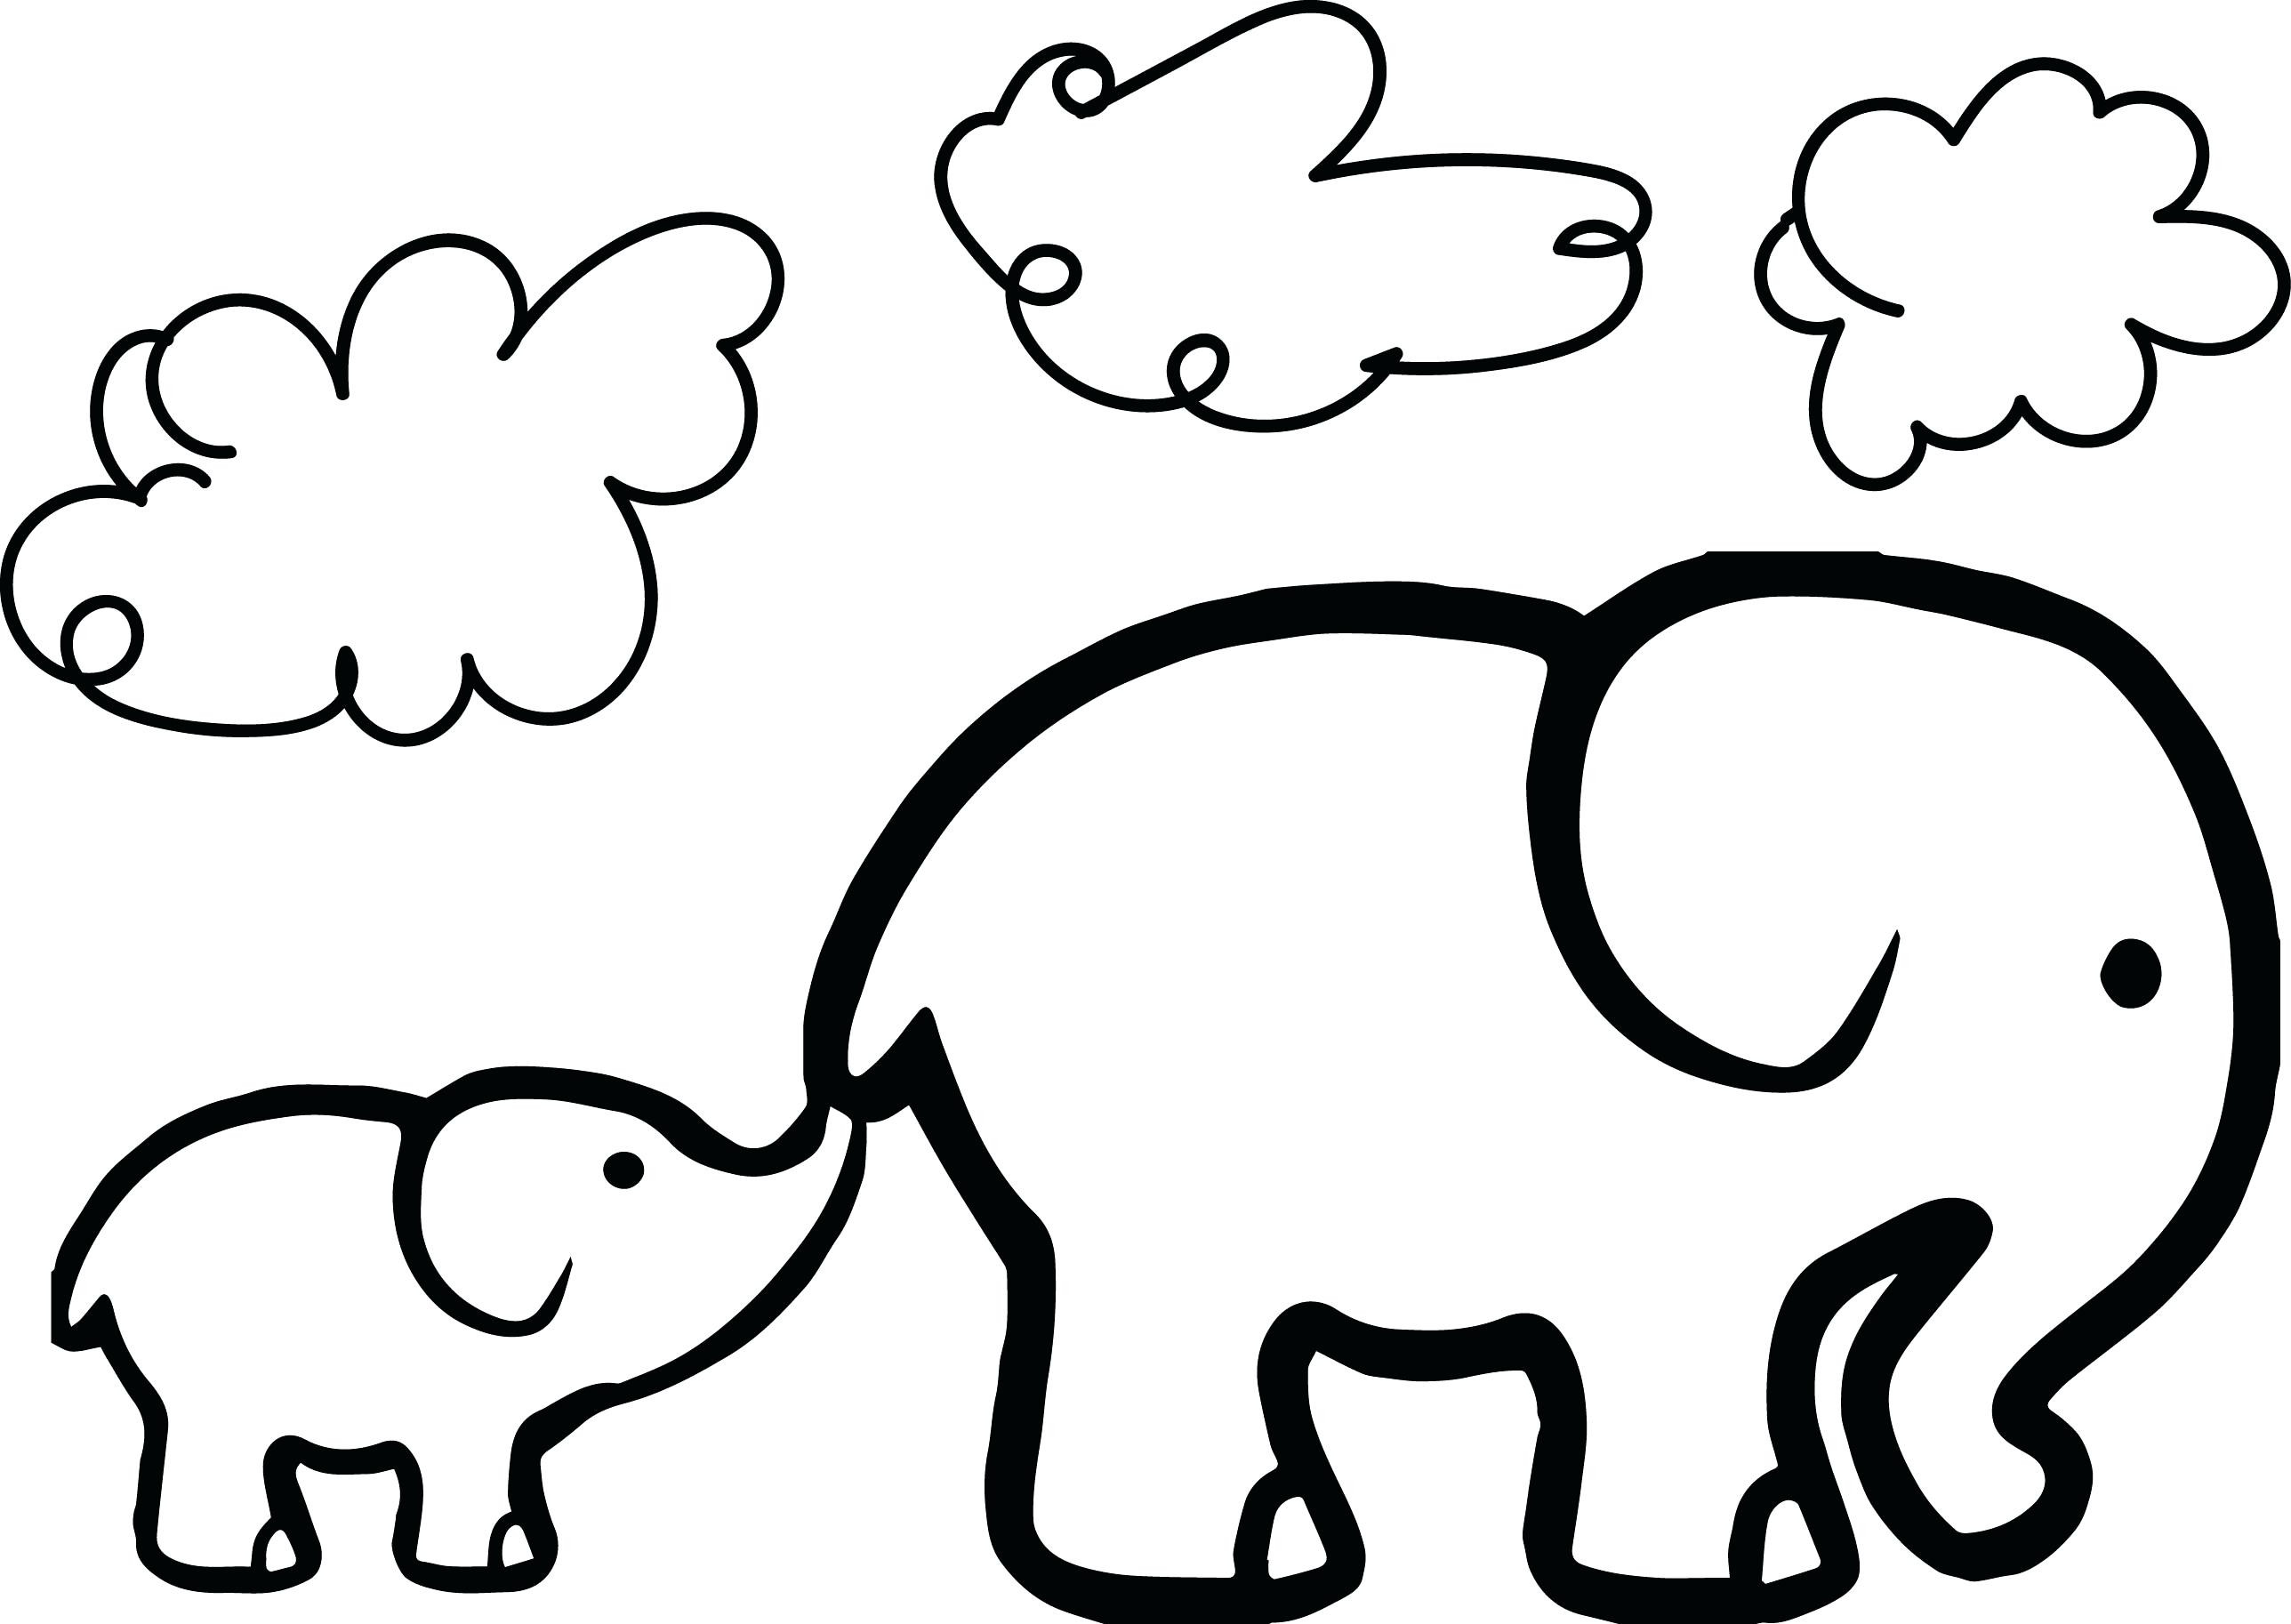 Elephant Head Coloring Page at GetColorings.com | Free ...